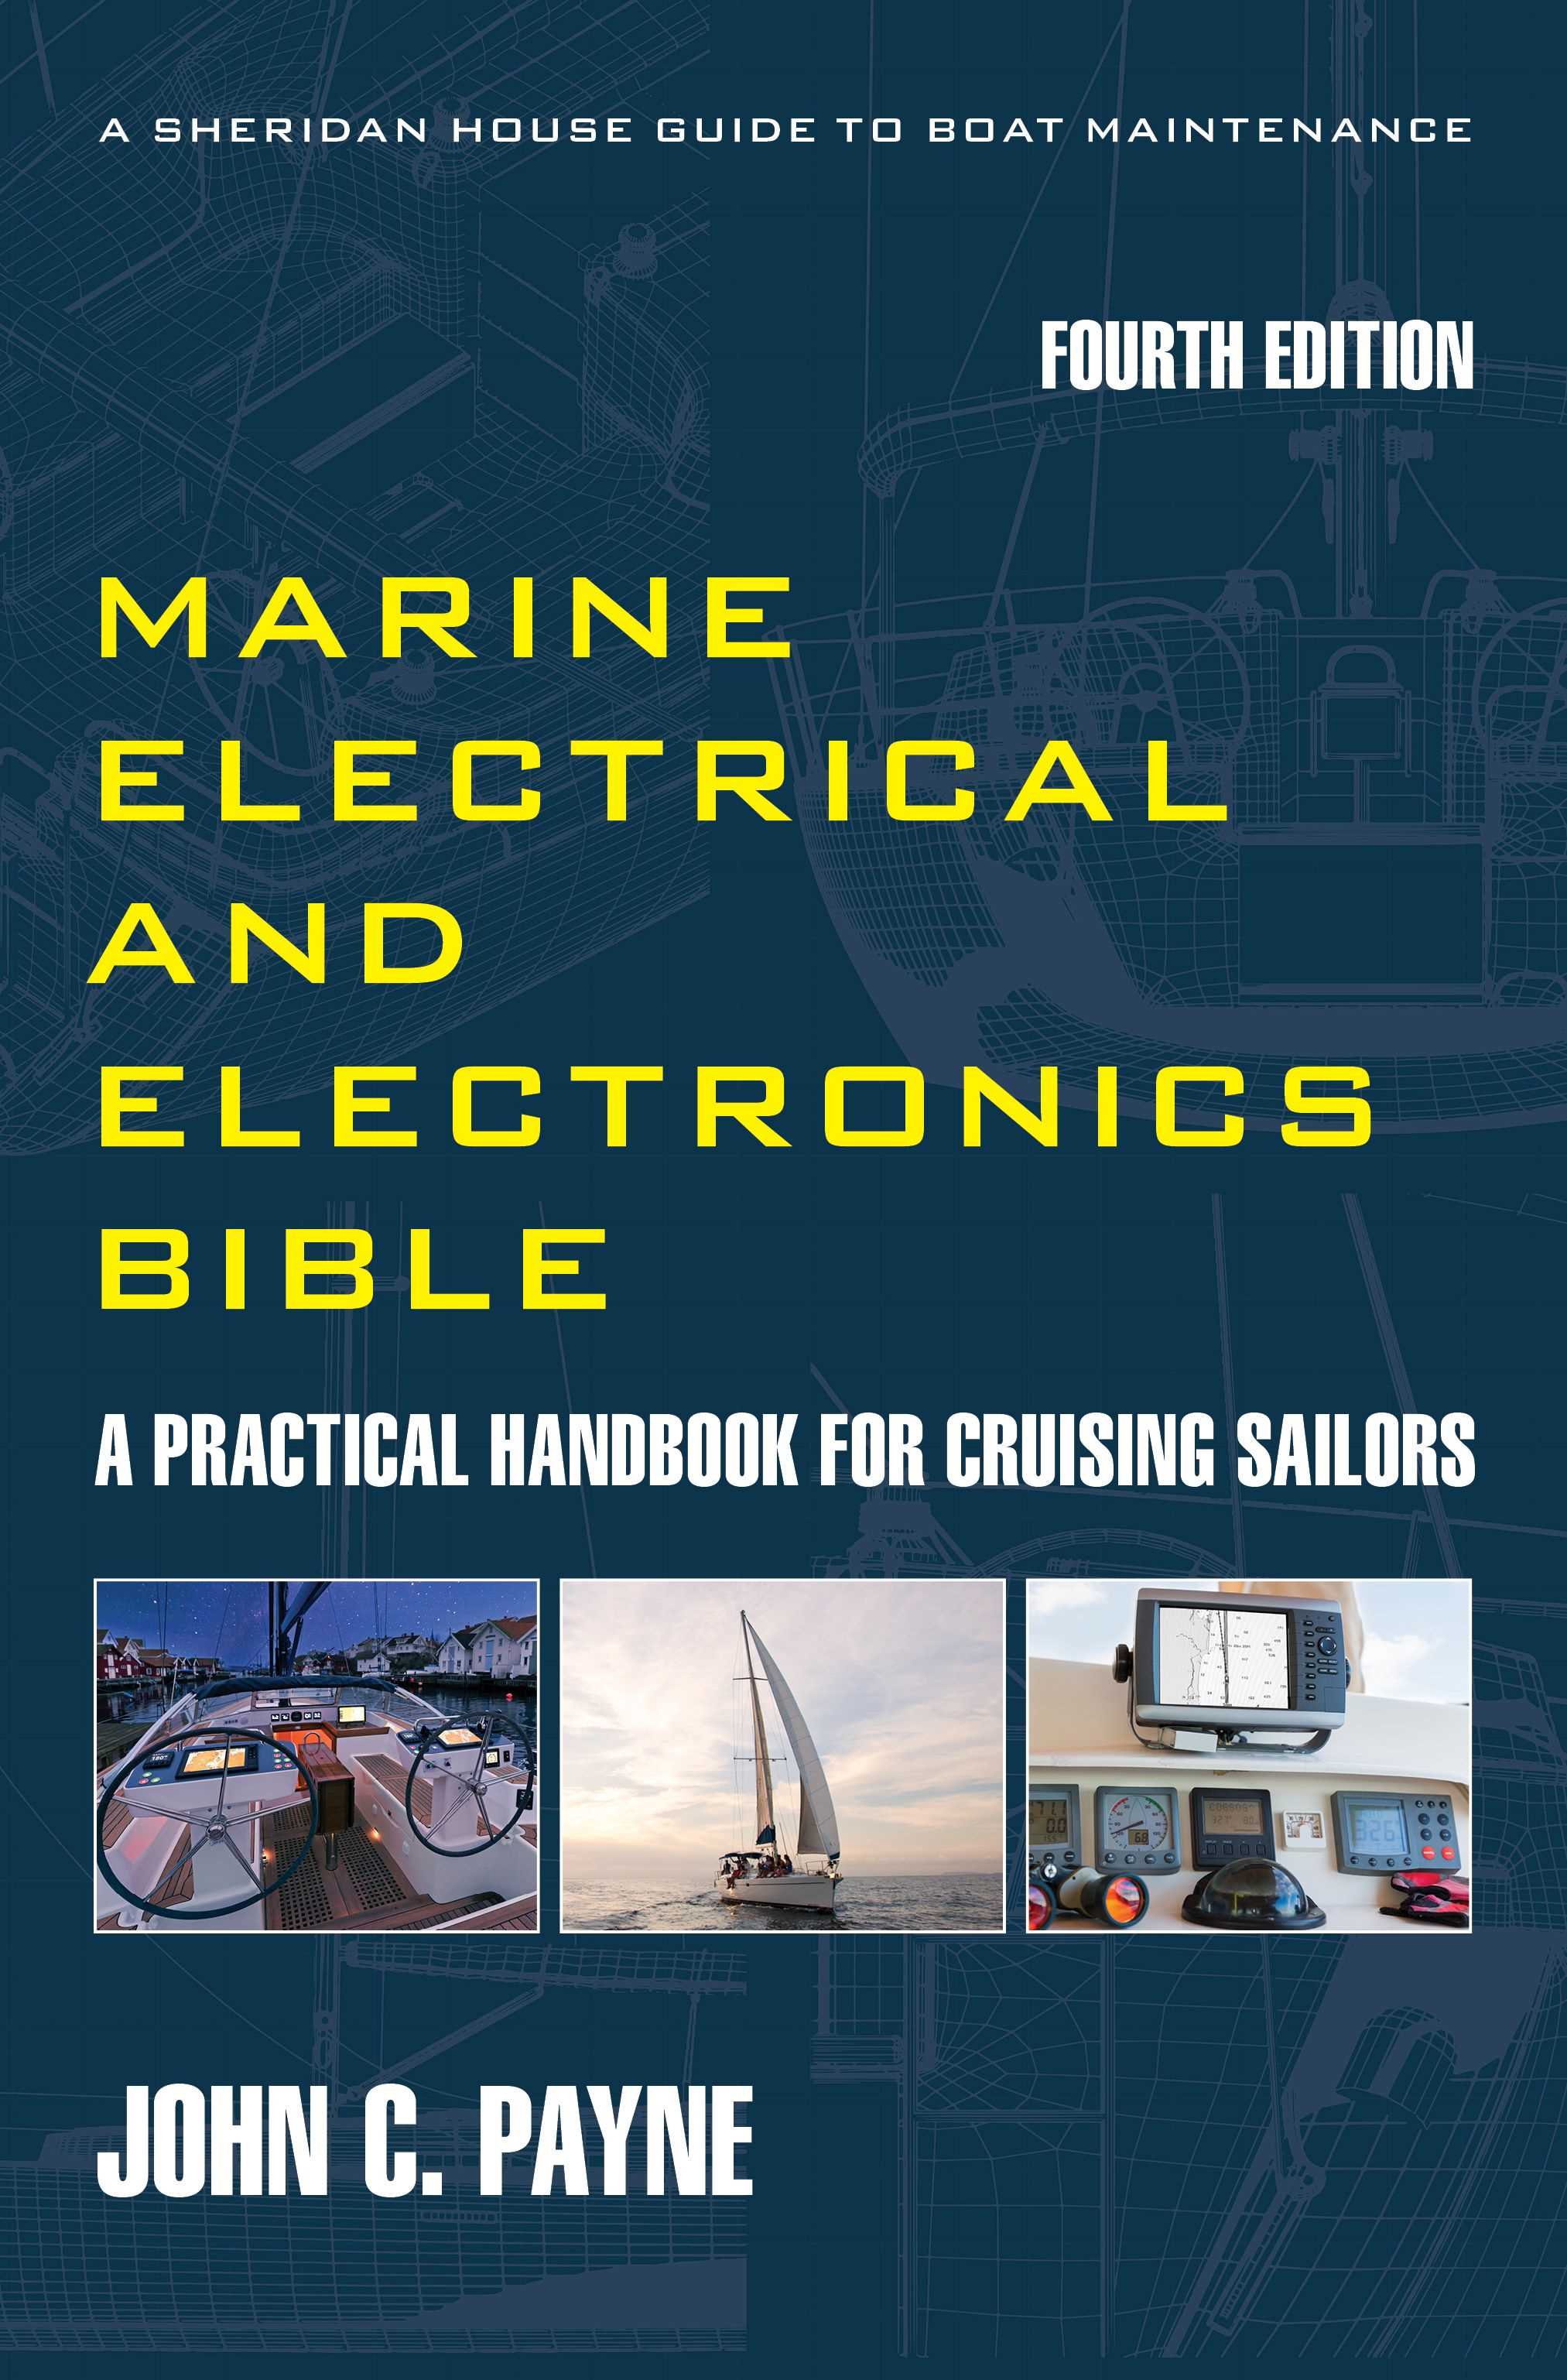 Marine Electrical and Electronics Bible 4th Edition.